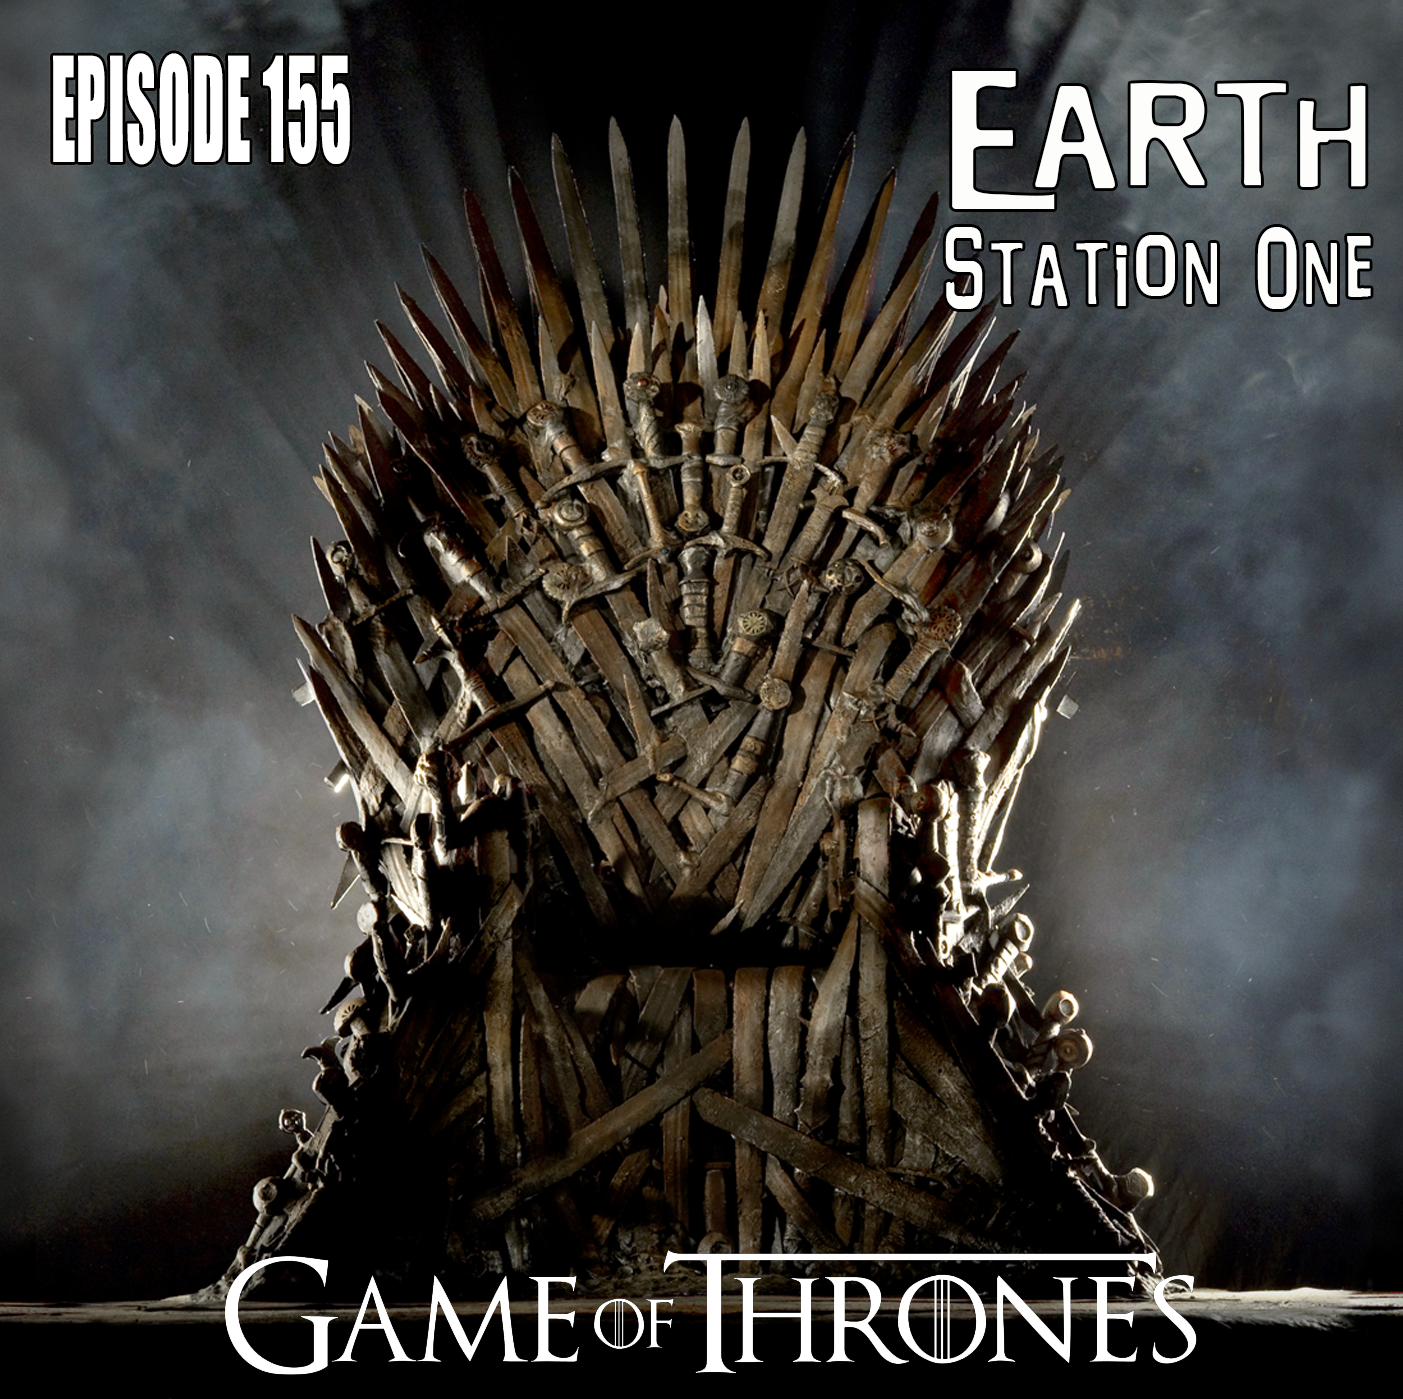 Earth Staton One Episode 156 - A Game of Thrones